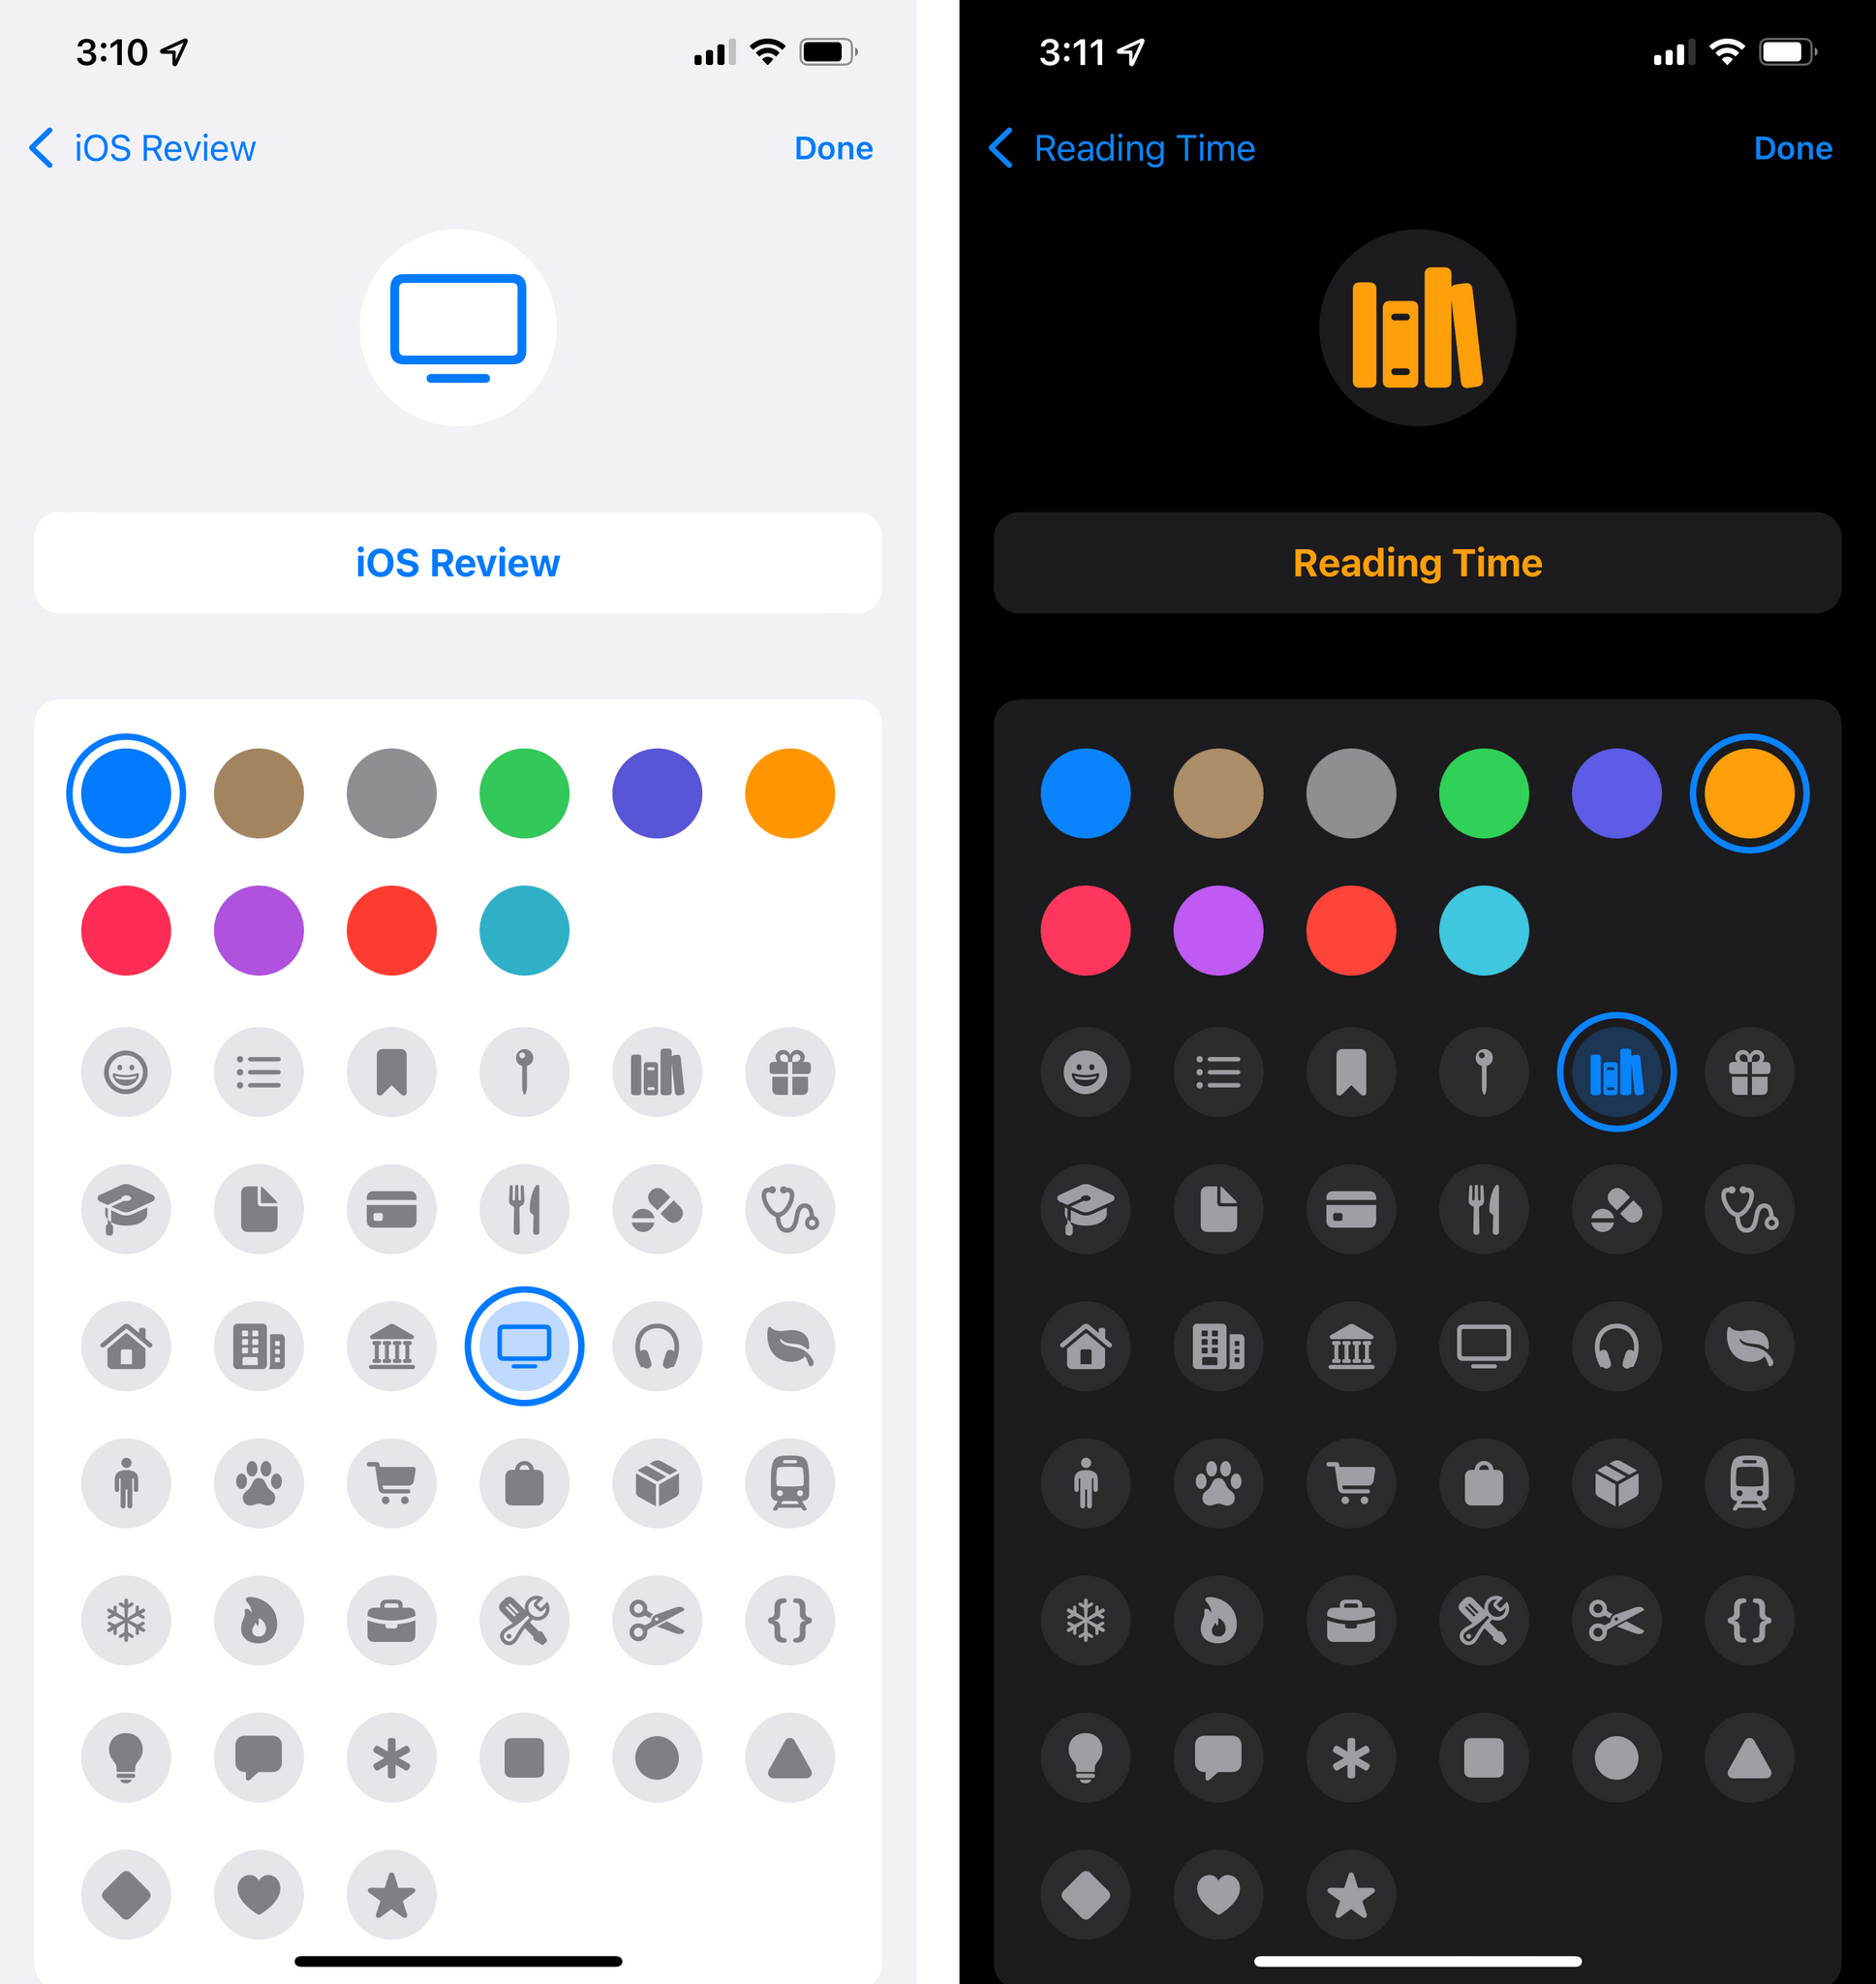 Custom colors and icons for Focus modes.